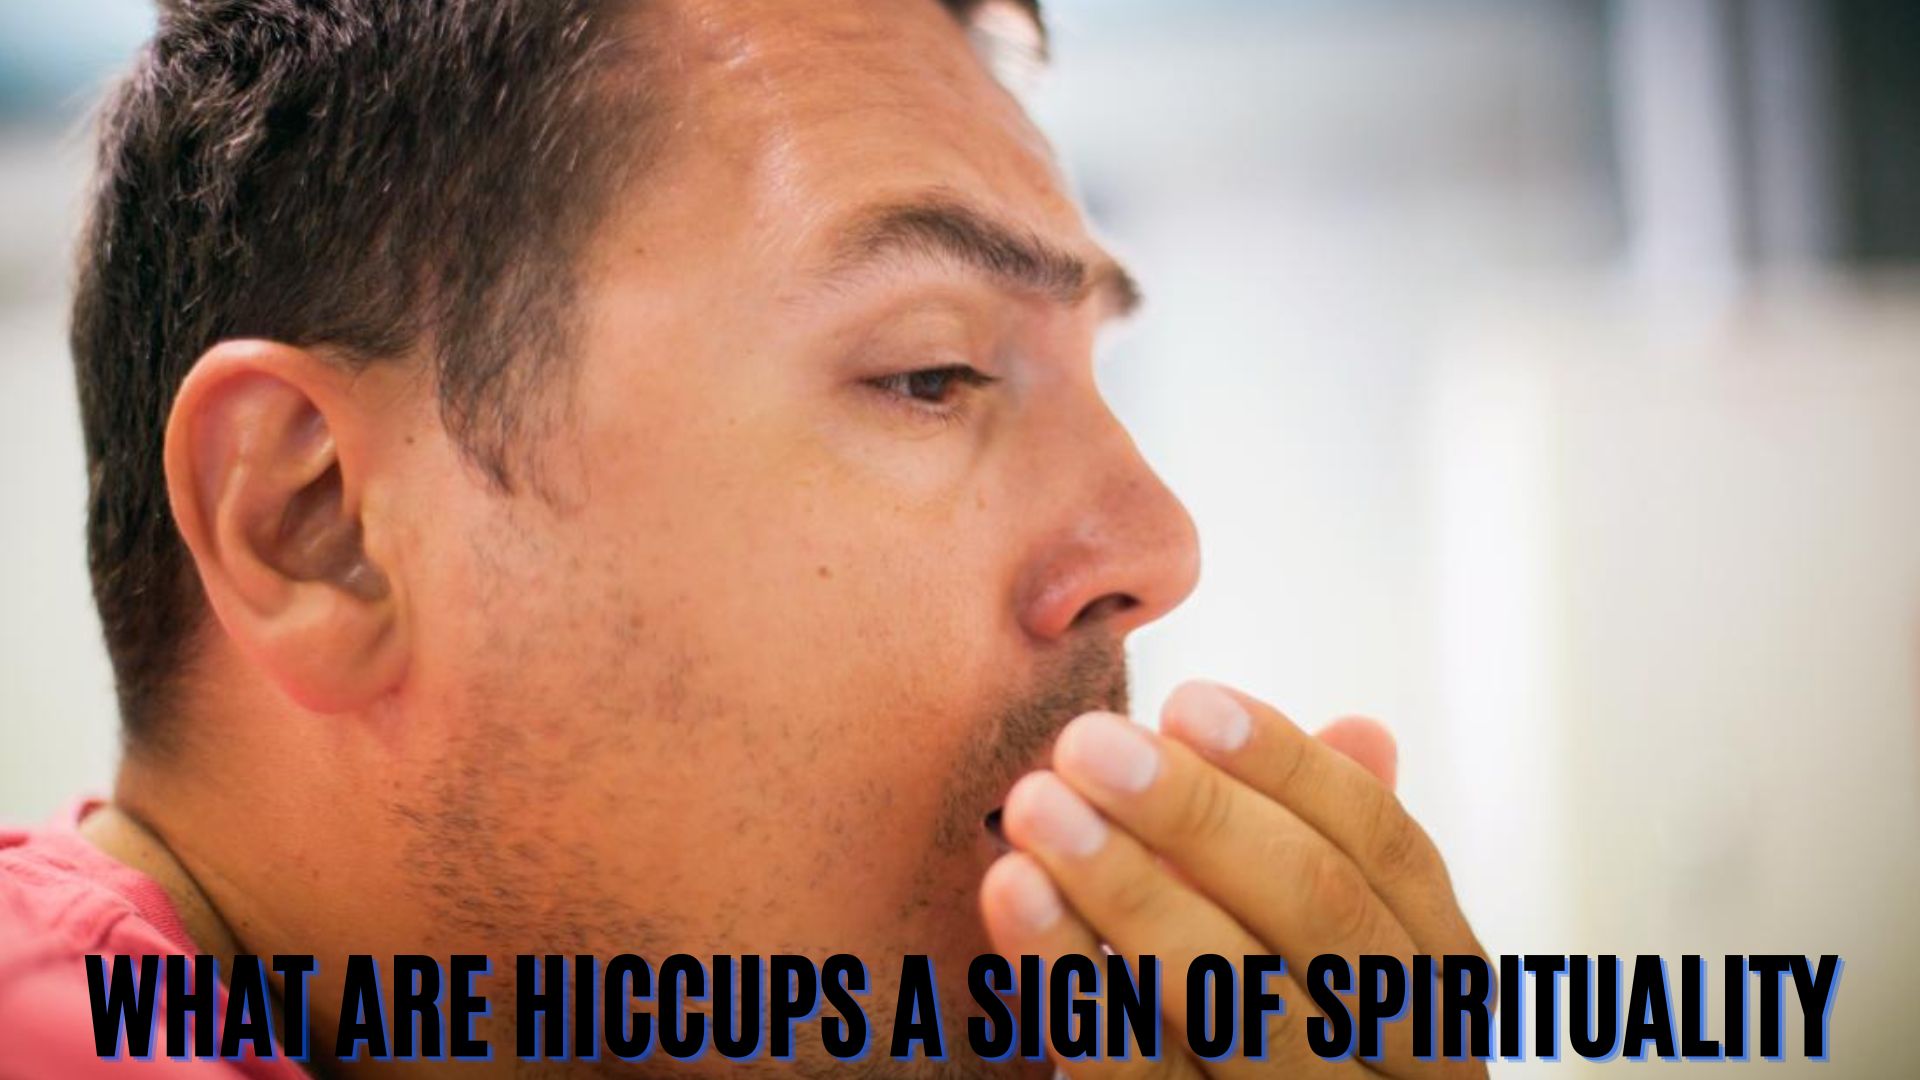 What Are Hiccups A Sign Of Spirituality?